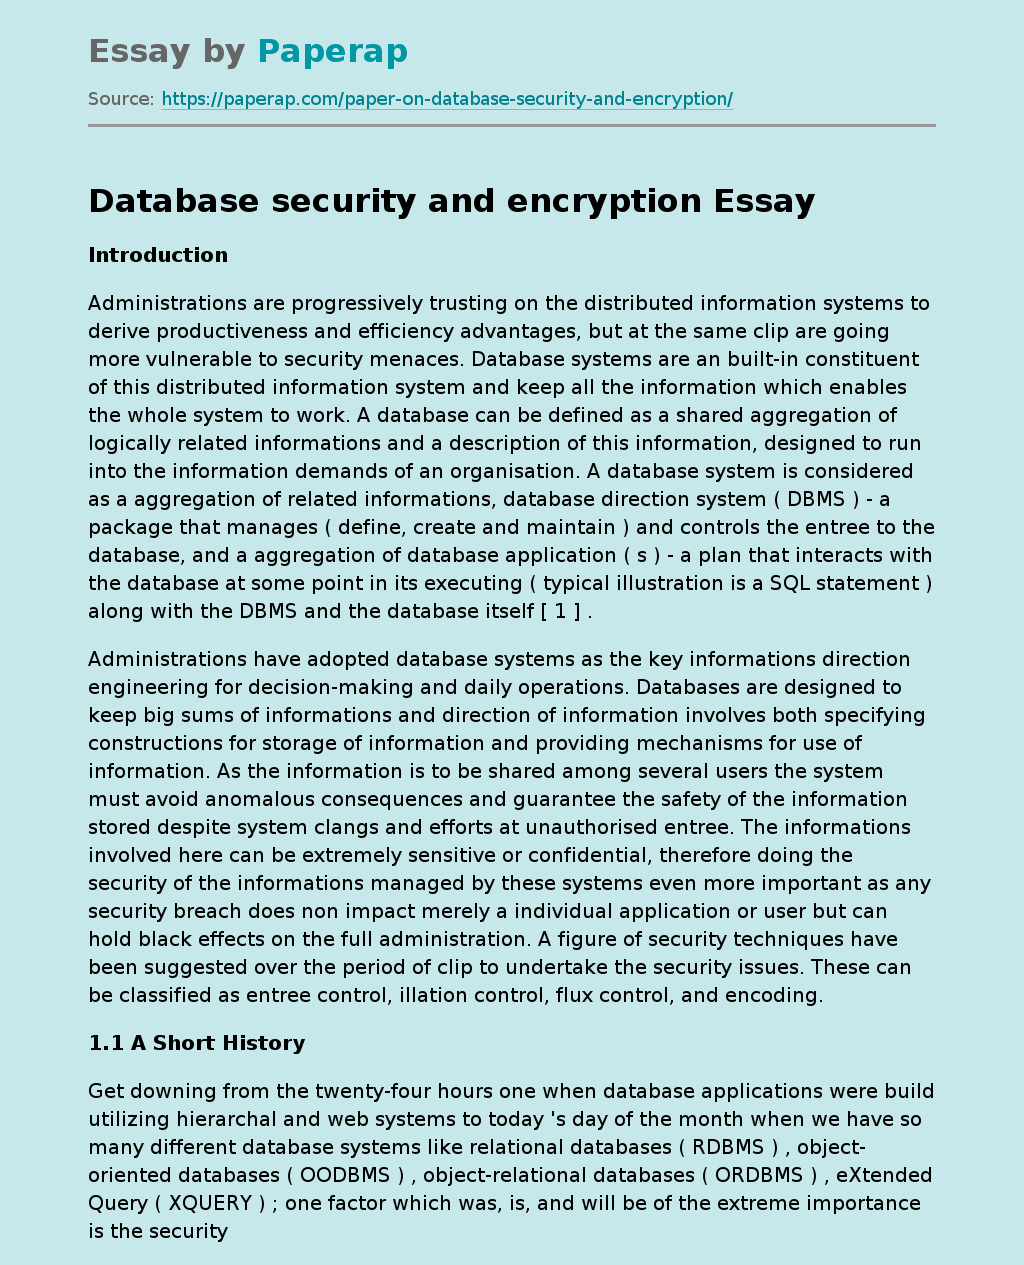 Database Security and Encryption: Encoding Techniques